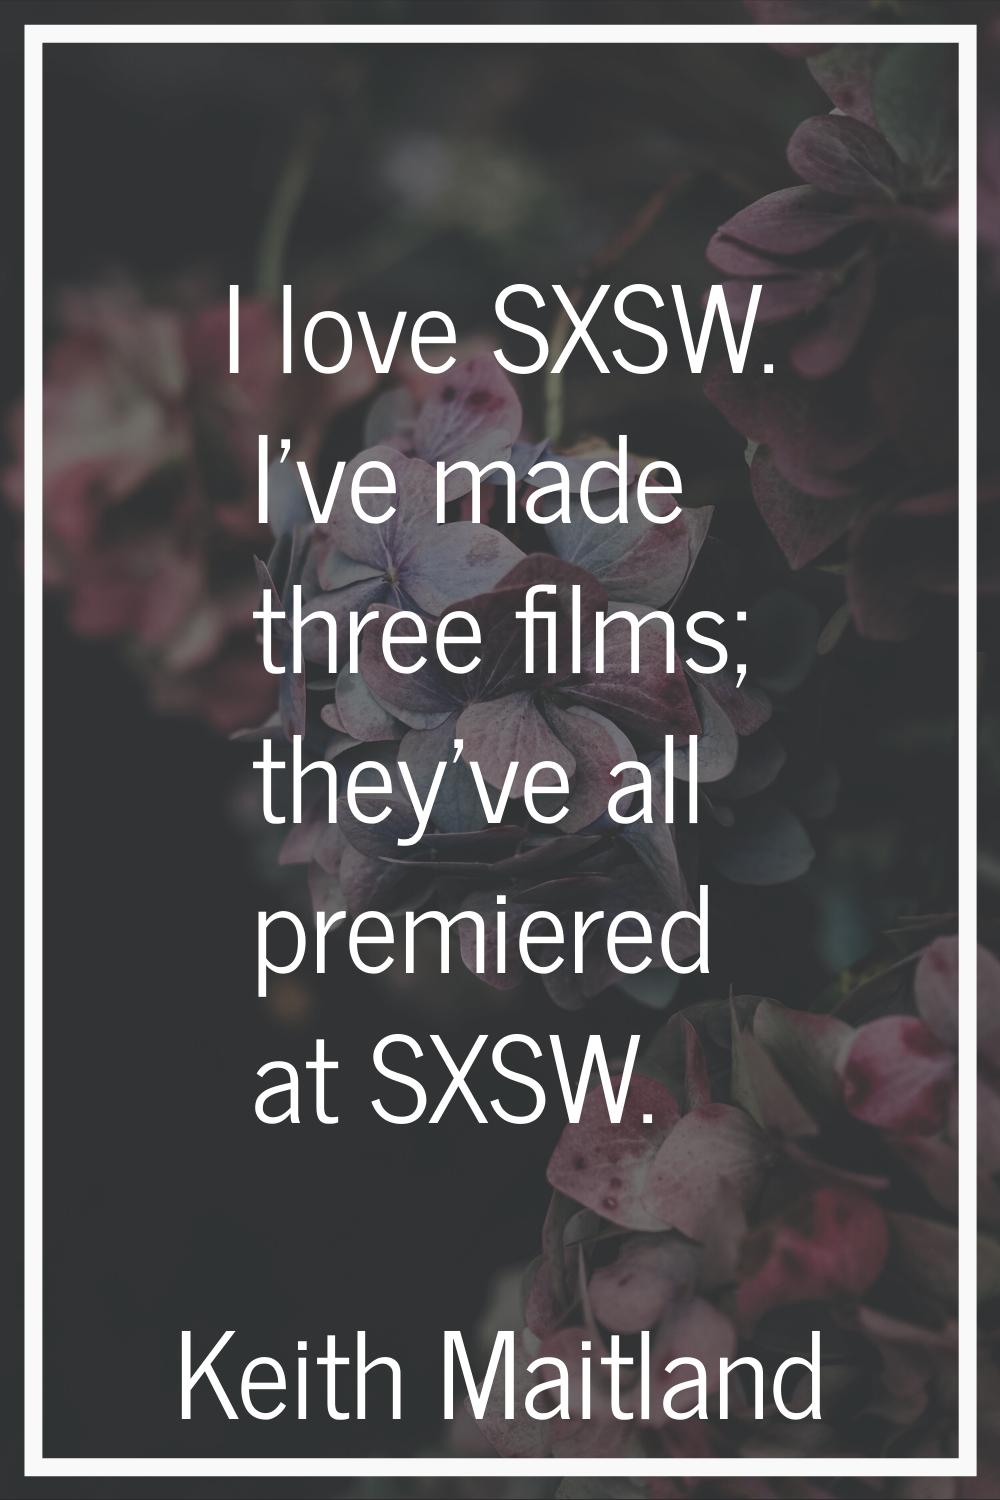 I love SXSW. I've made three films; they've all premiered at SXSW.